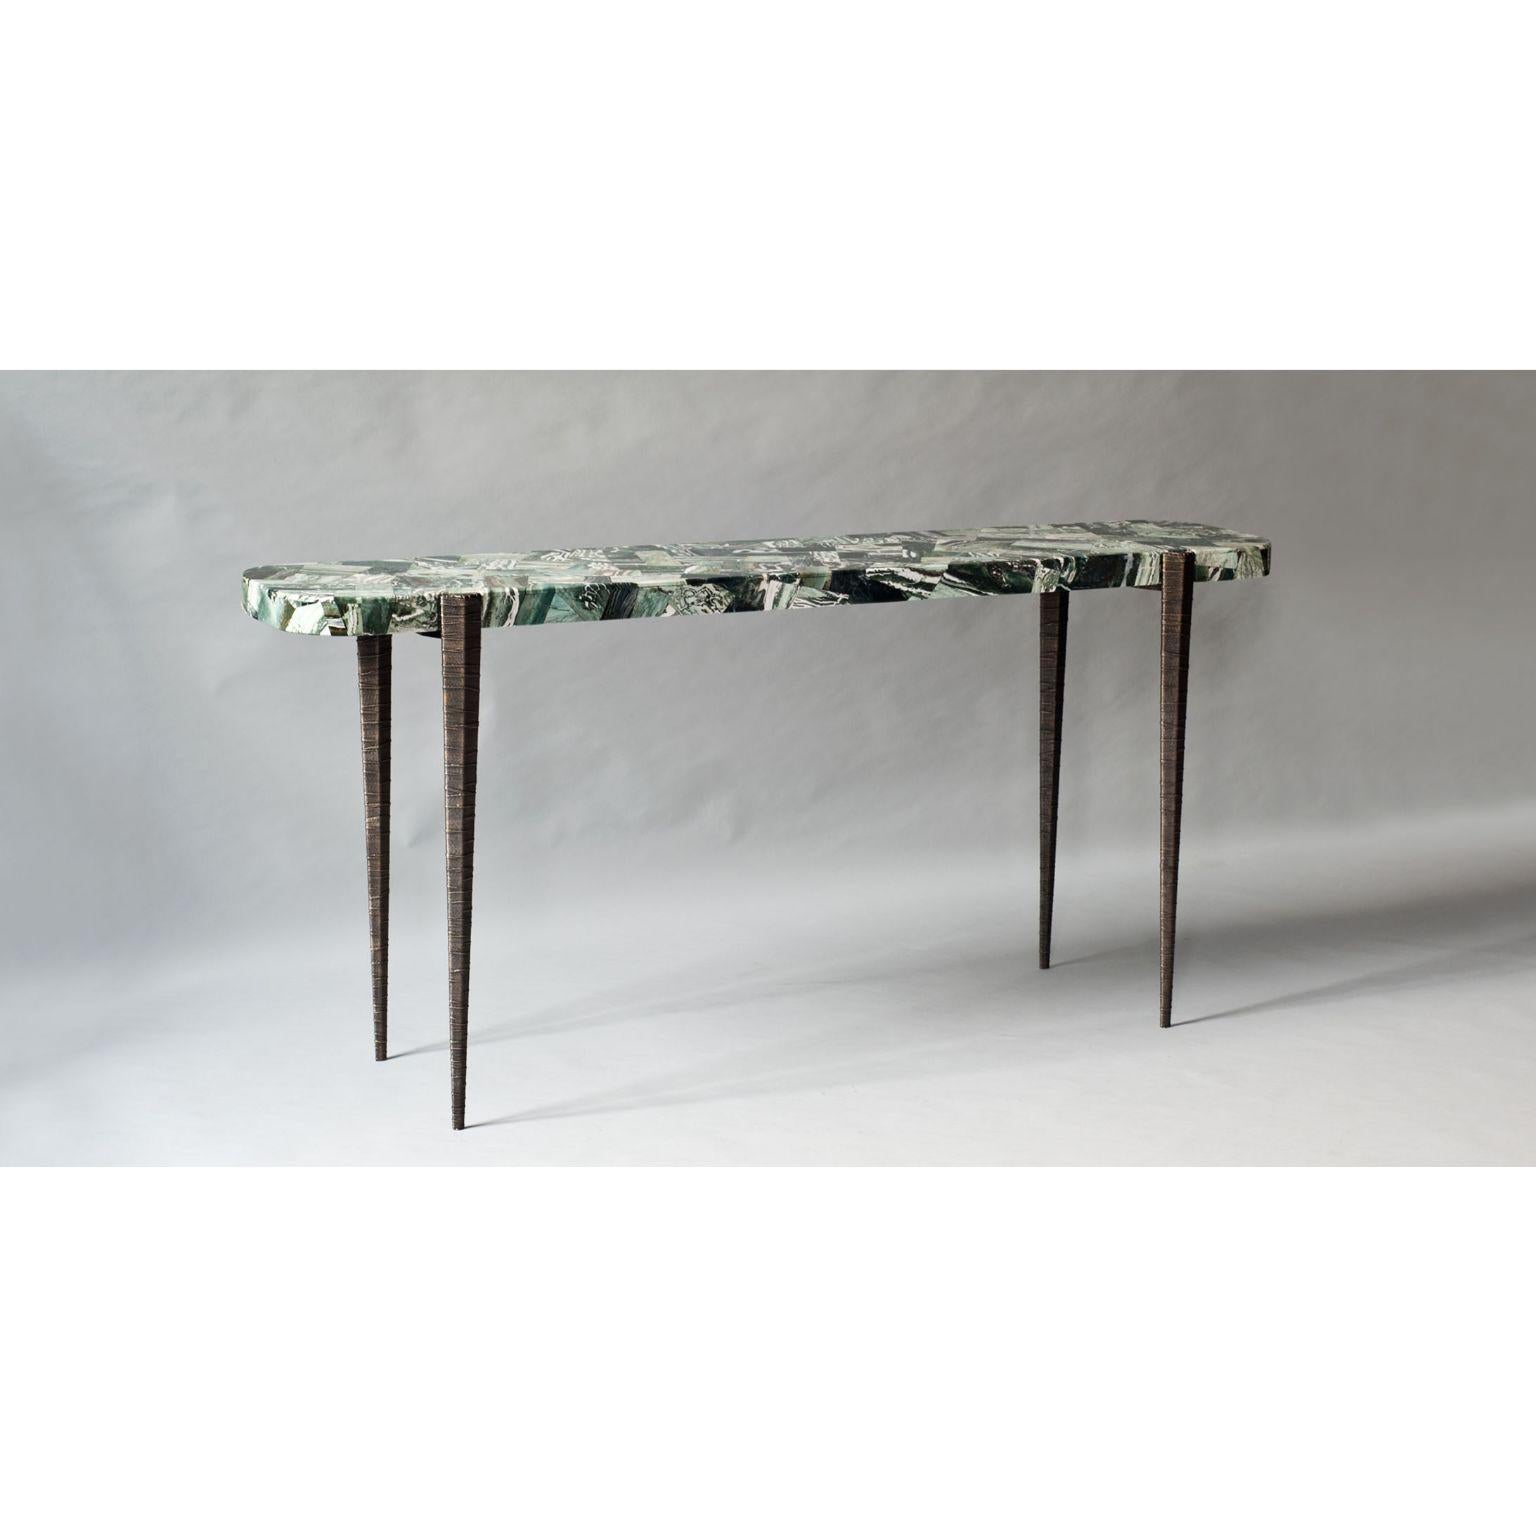 Bind console by DeMuro Das 
Dimensions: W 165 x D 37.6 x H 76 cm
Materials: Agate (Green Zebra), polished (Random)
 Solid bronze (Antique) legs

Dimensions and finishes can be customized.

DeMuro Das is an international design firm and the